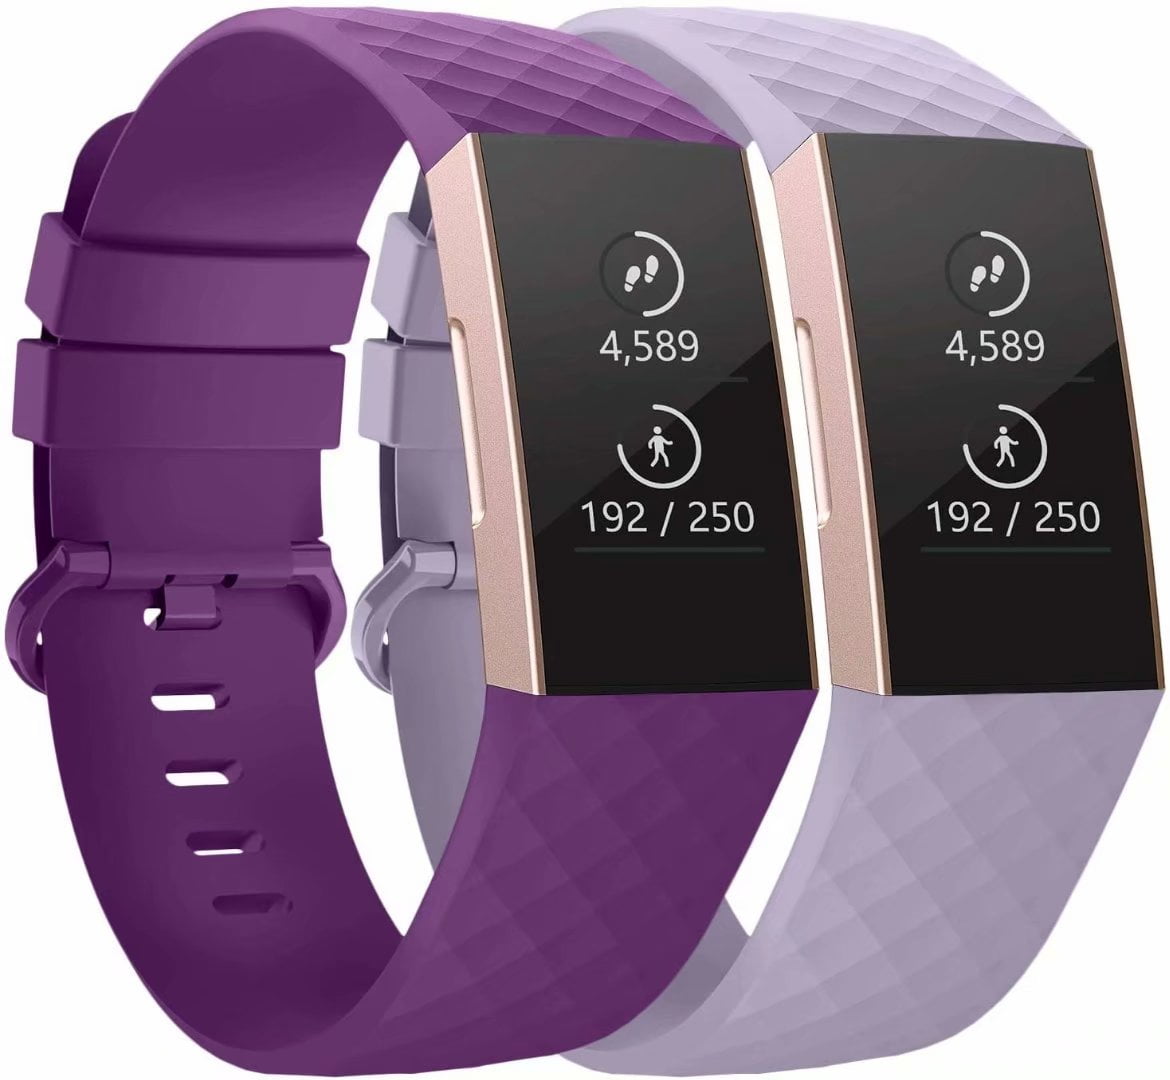 For Fitbit Charge 2 Replacement Diamond Wristband Wrist Strap WatchBand Lavender 